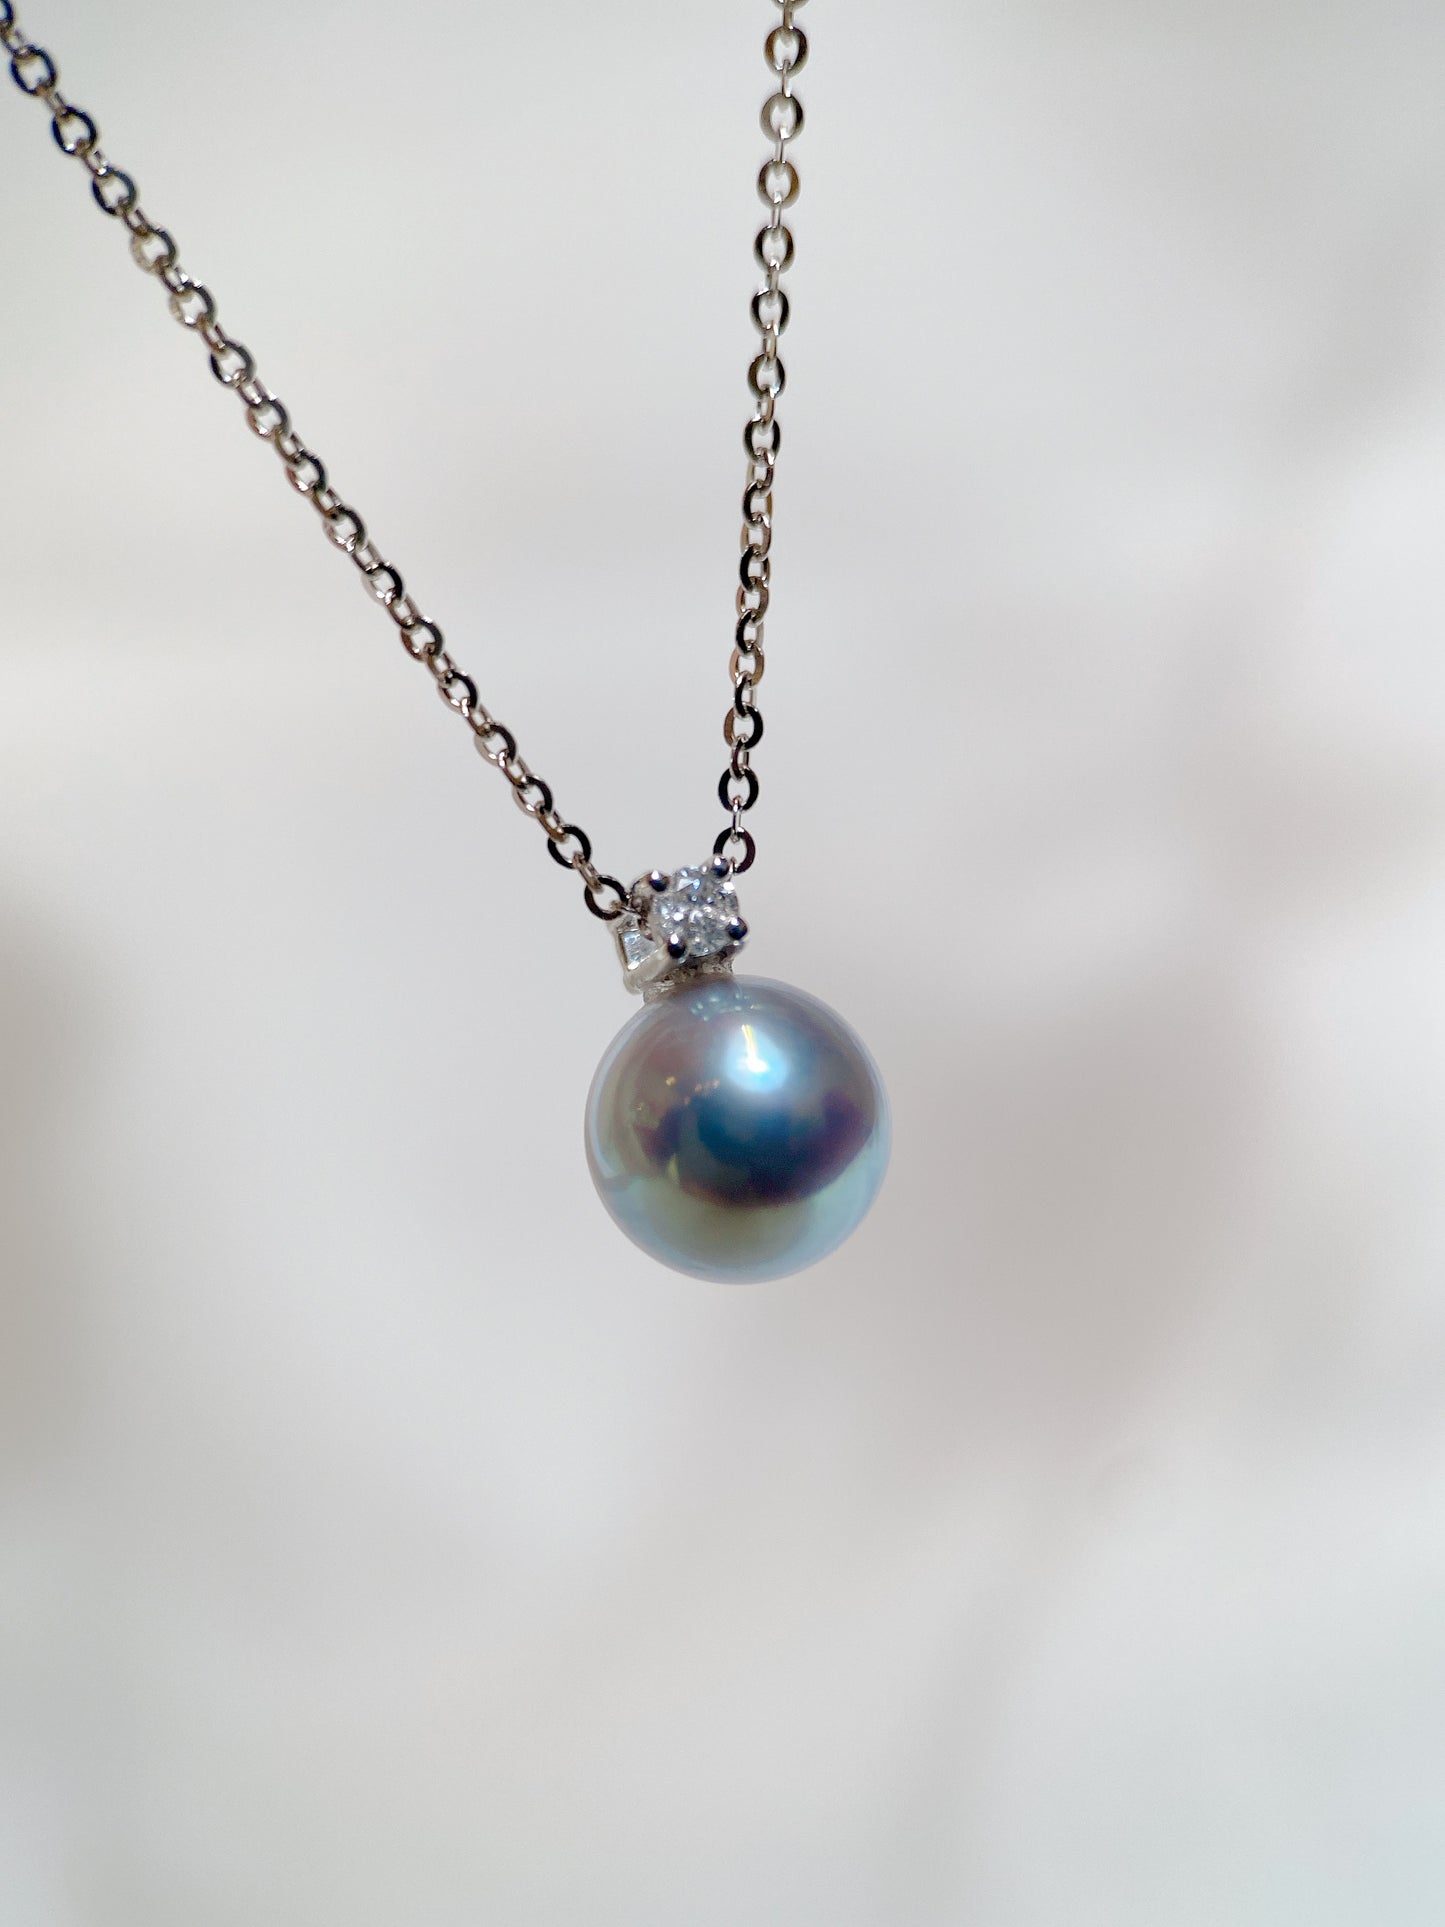 Blue Akoya Pearl Pendant in 18K White Gold with Diamond, d0.05ct,8-8.5mm